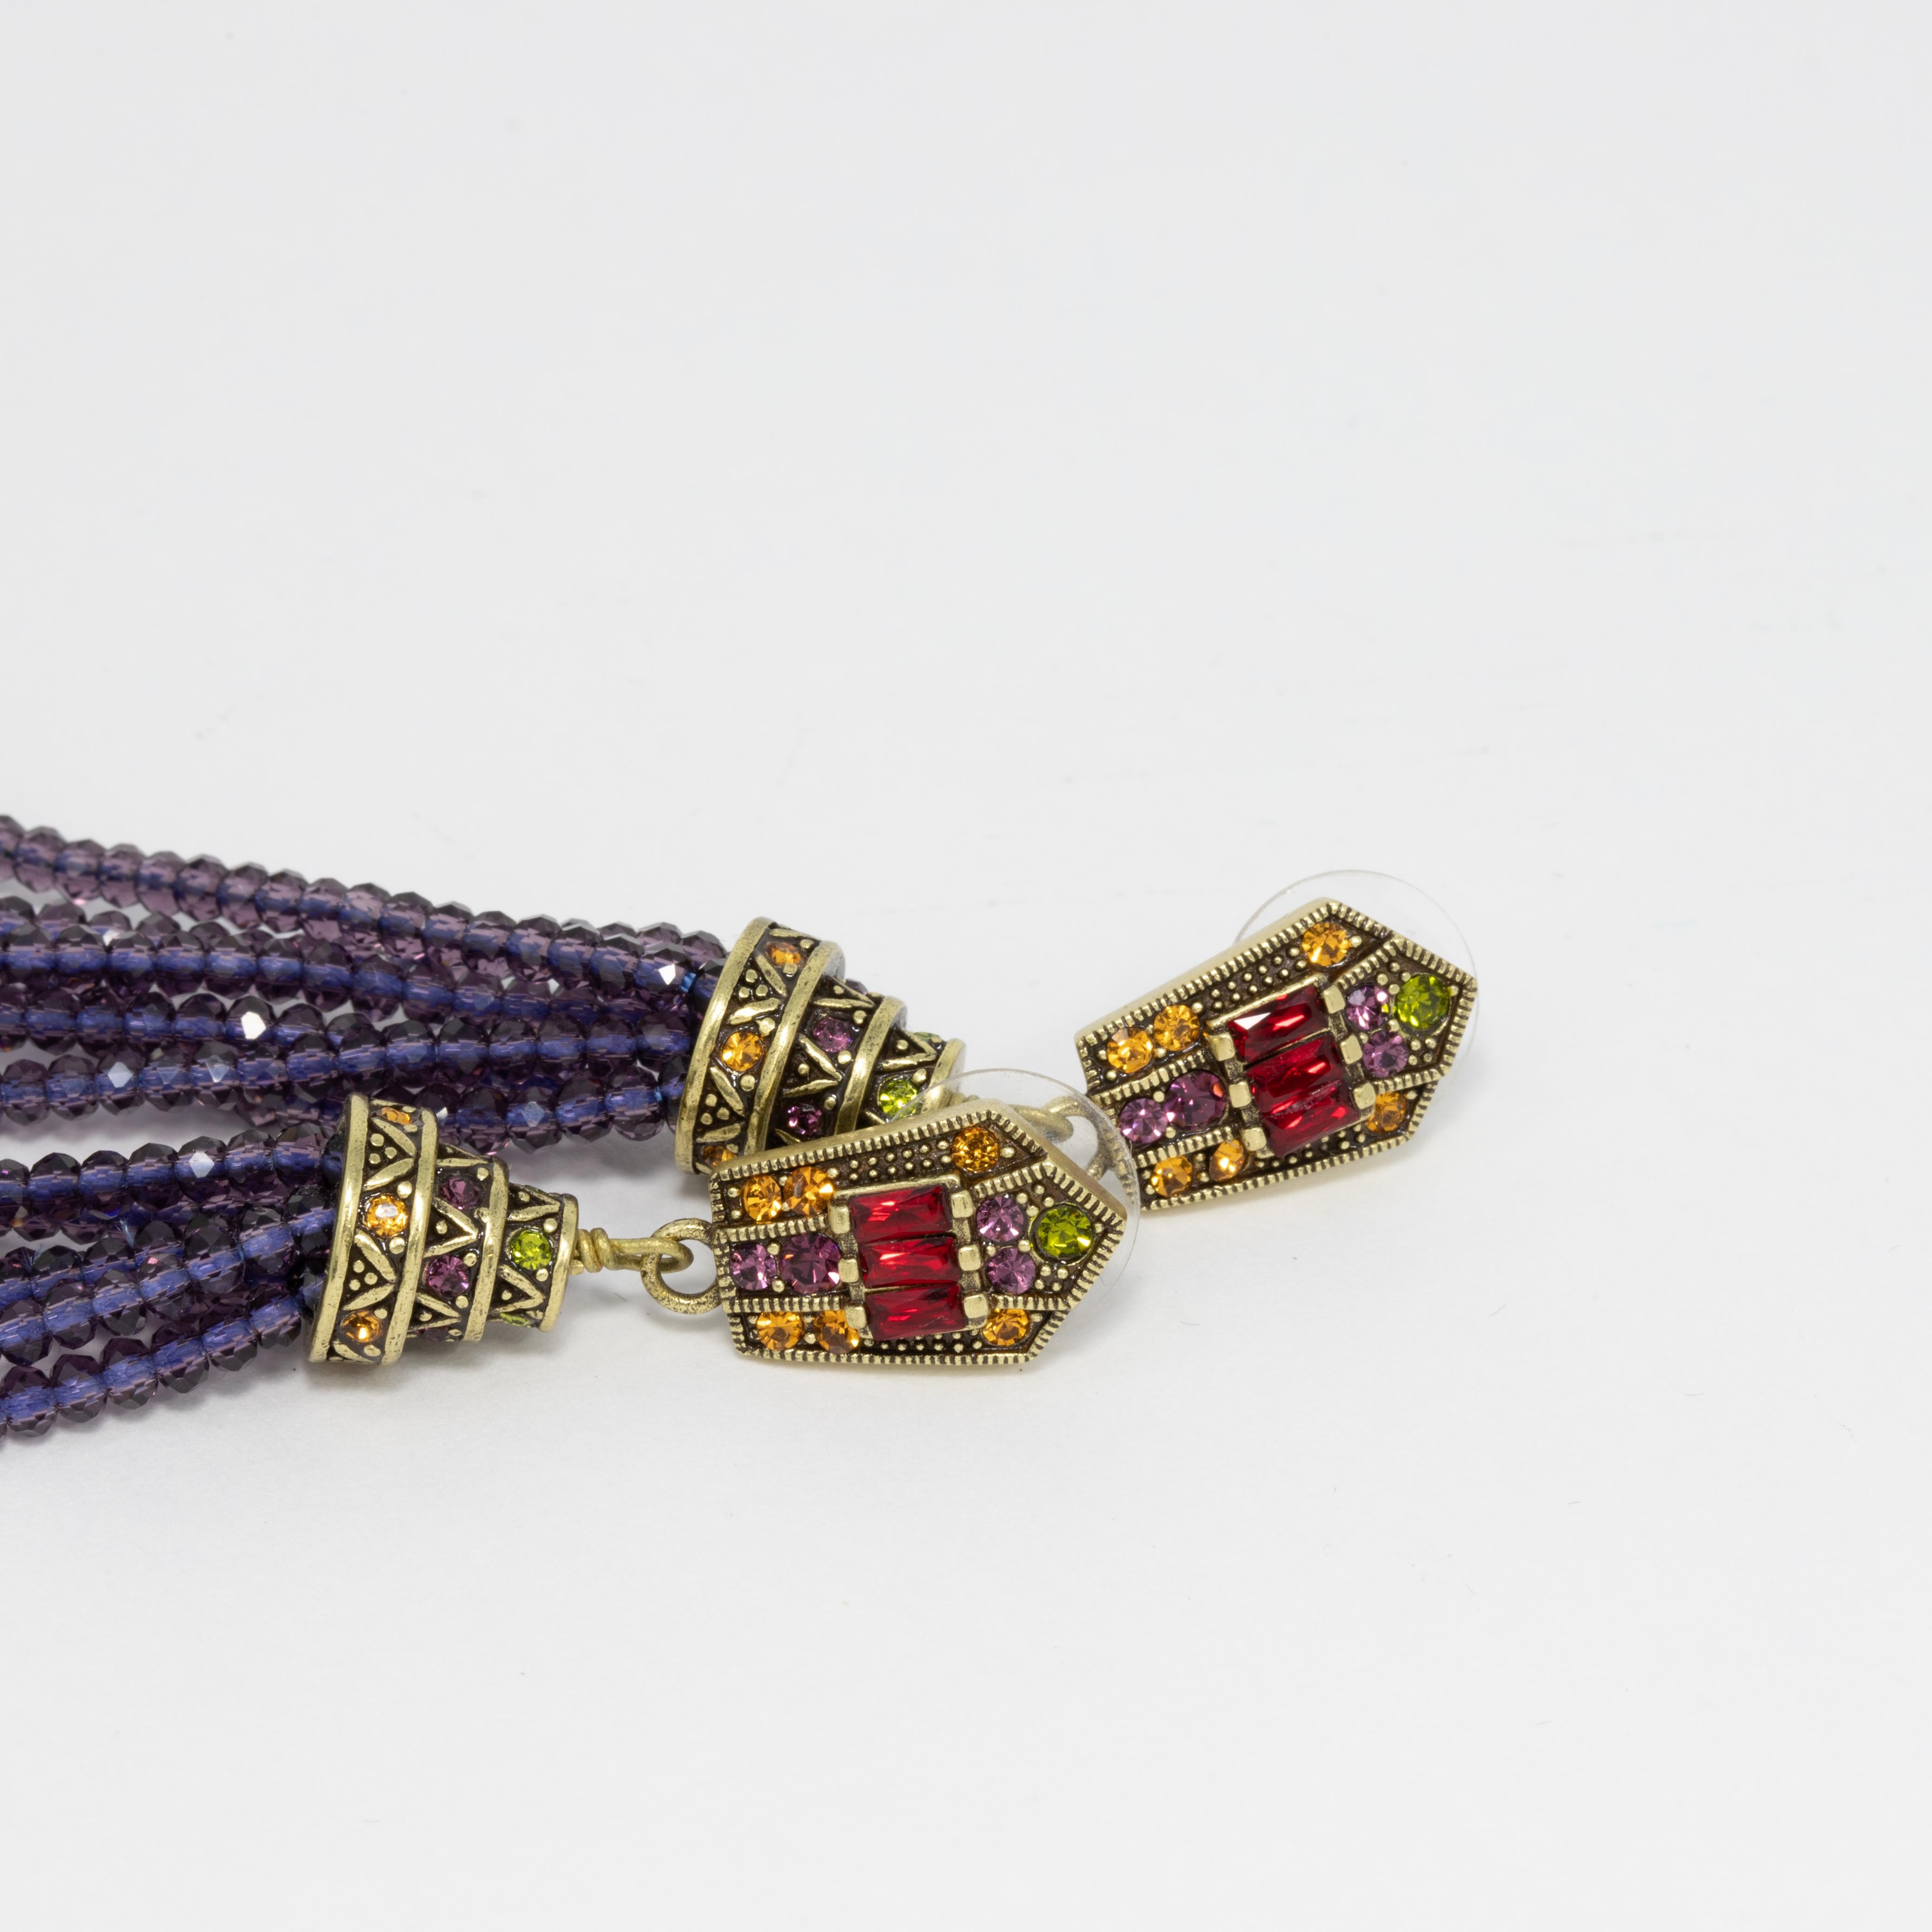 Embellished dangling post-back earrings by Heidi Daus. Feature ruby red and citrine crystal tops with dangling purple and green crystal tassels.

Hallmarks: Heidi Daus, China

